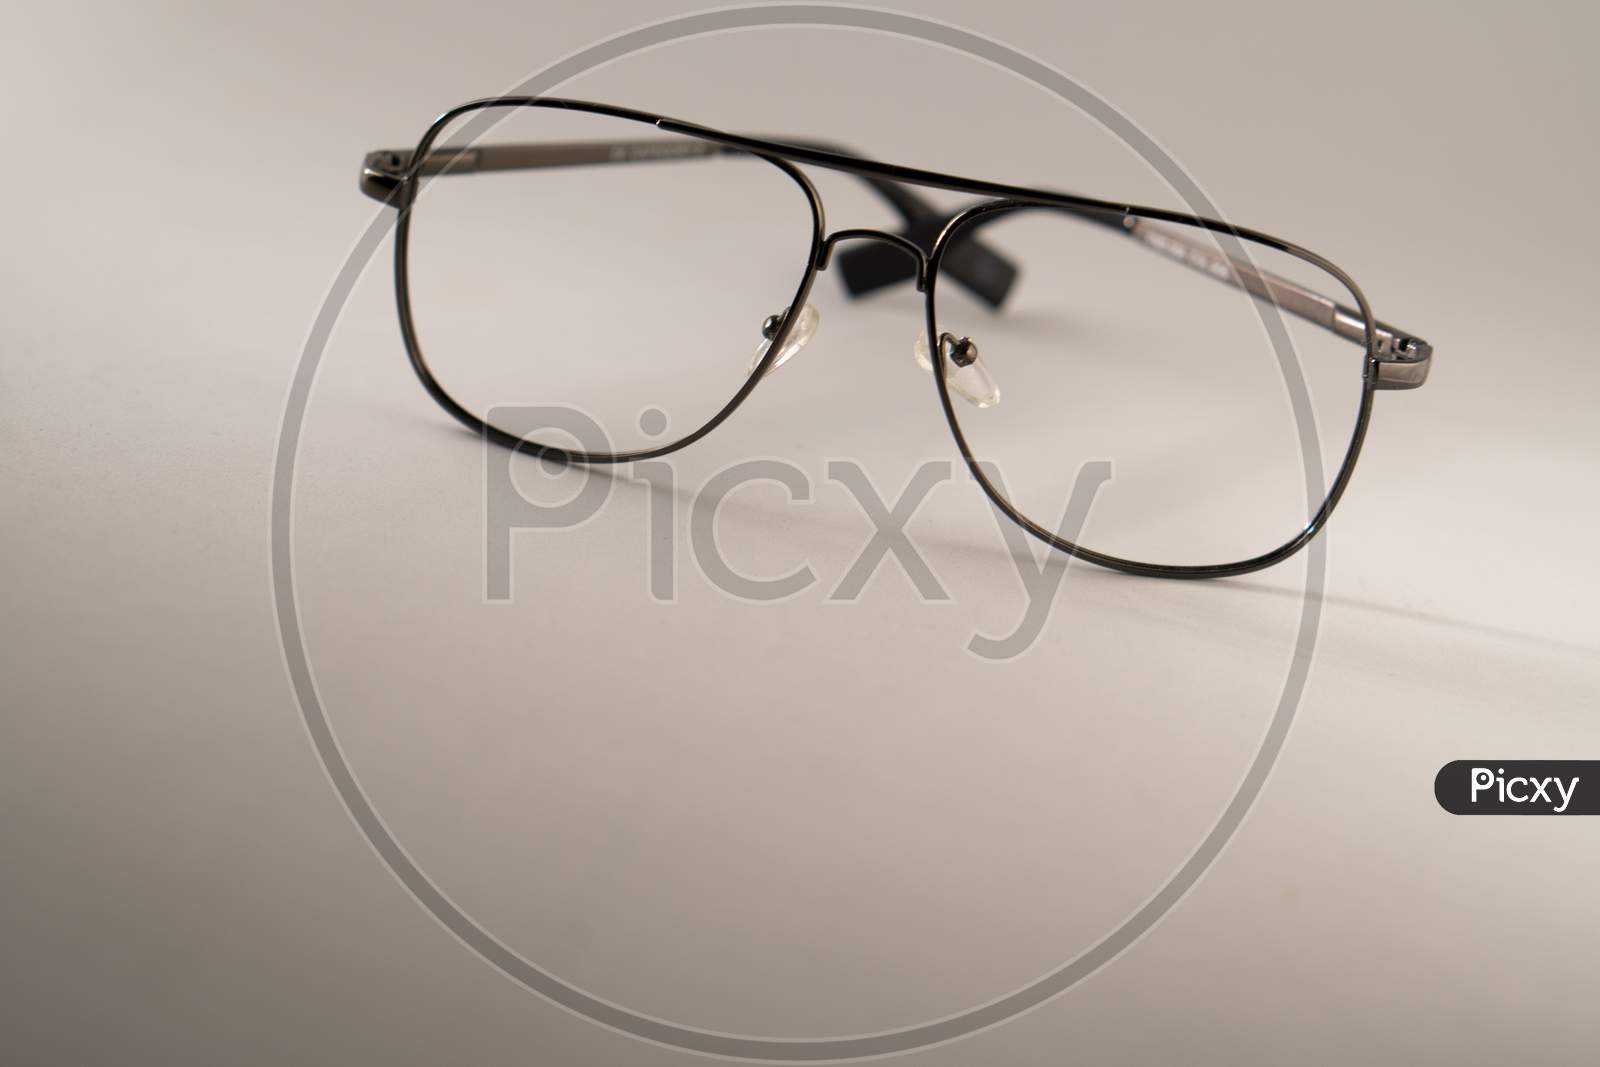 Black frame spectacle (eye glasses) isolated on a white background. Photo has empty space for text.